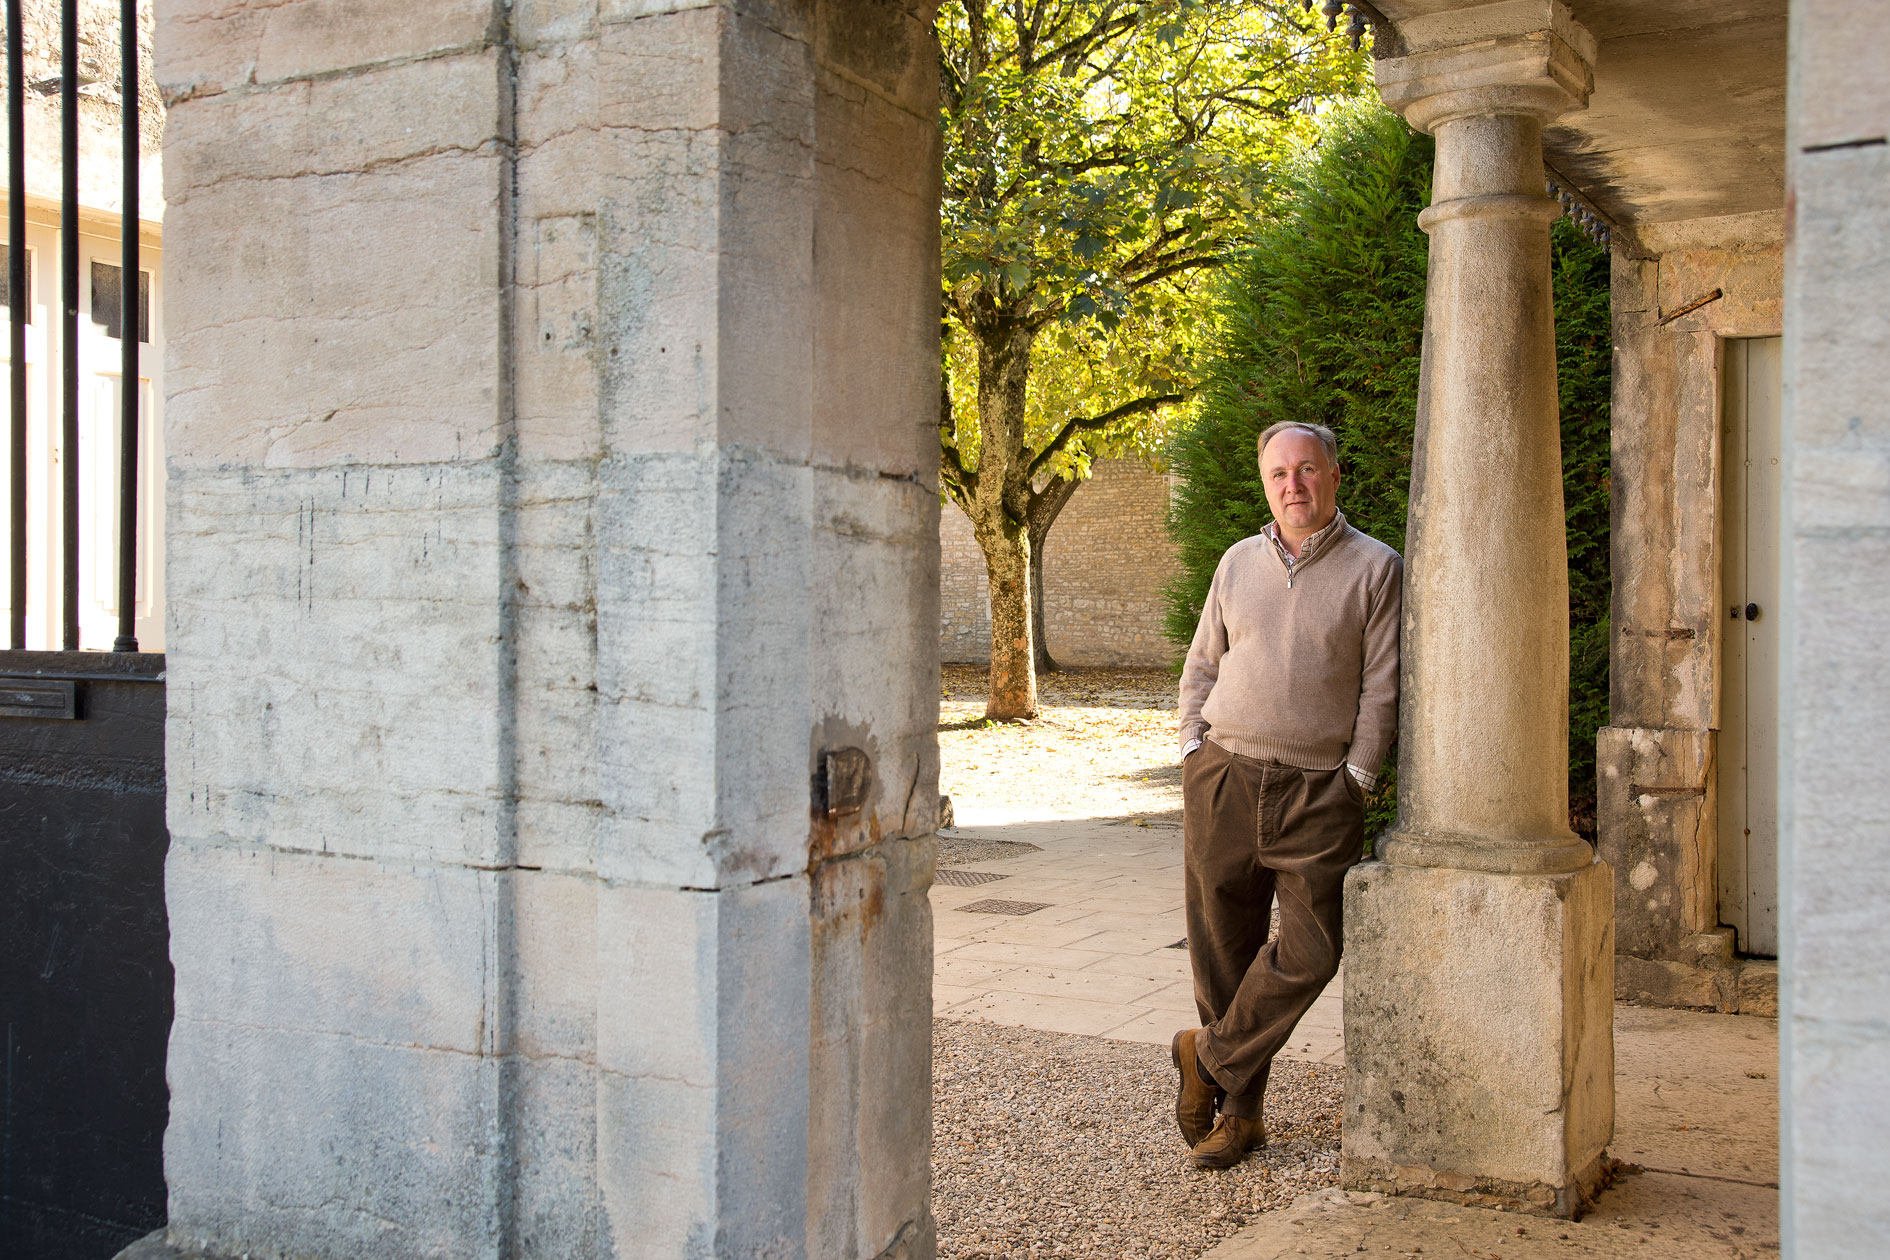 Brice de La Morandière knew little about wine when his family decided he should succeed his aunt as head of Domaine Leflaive, a winery in Puligny-Montrachet, Burgundy, France, founded by his great-grandfather. Starting with a clean slate helped him innovate. Photo: Domaine Leflaive